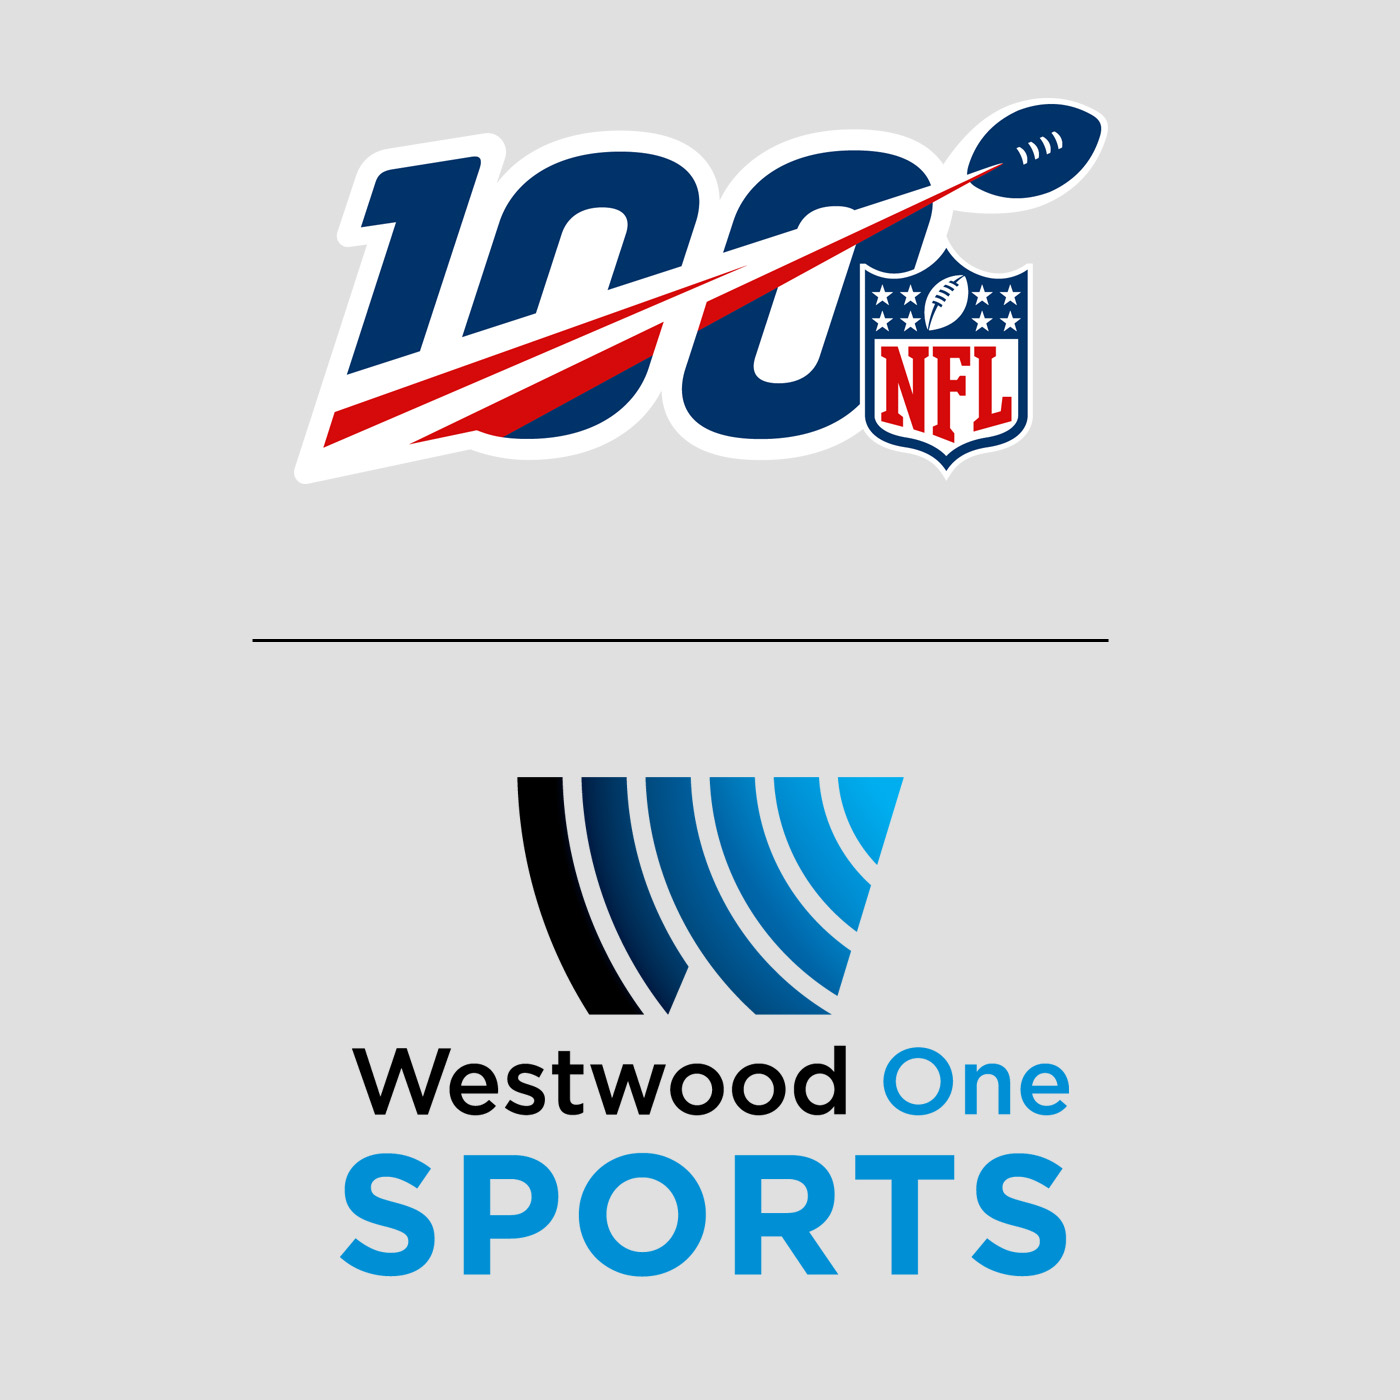 The NFL on Westwood One